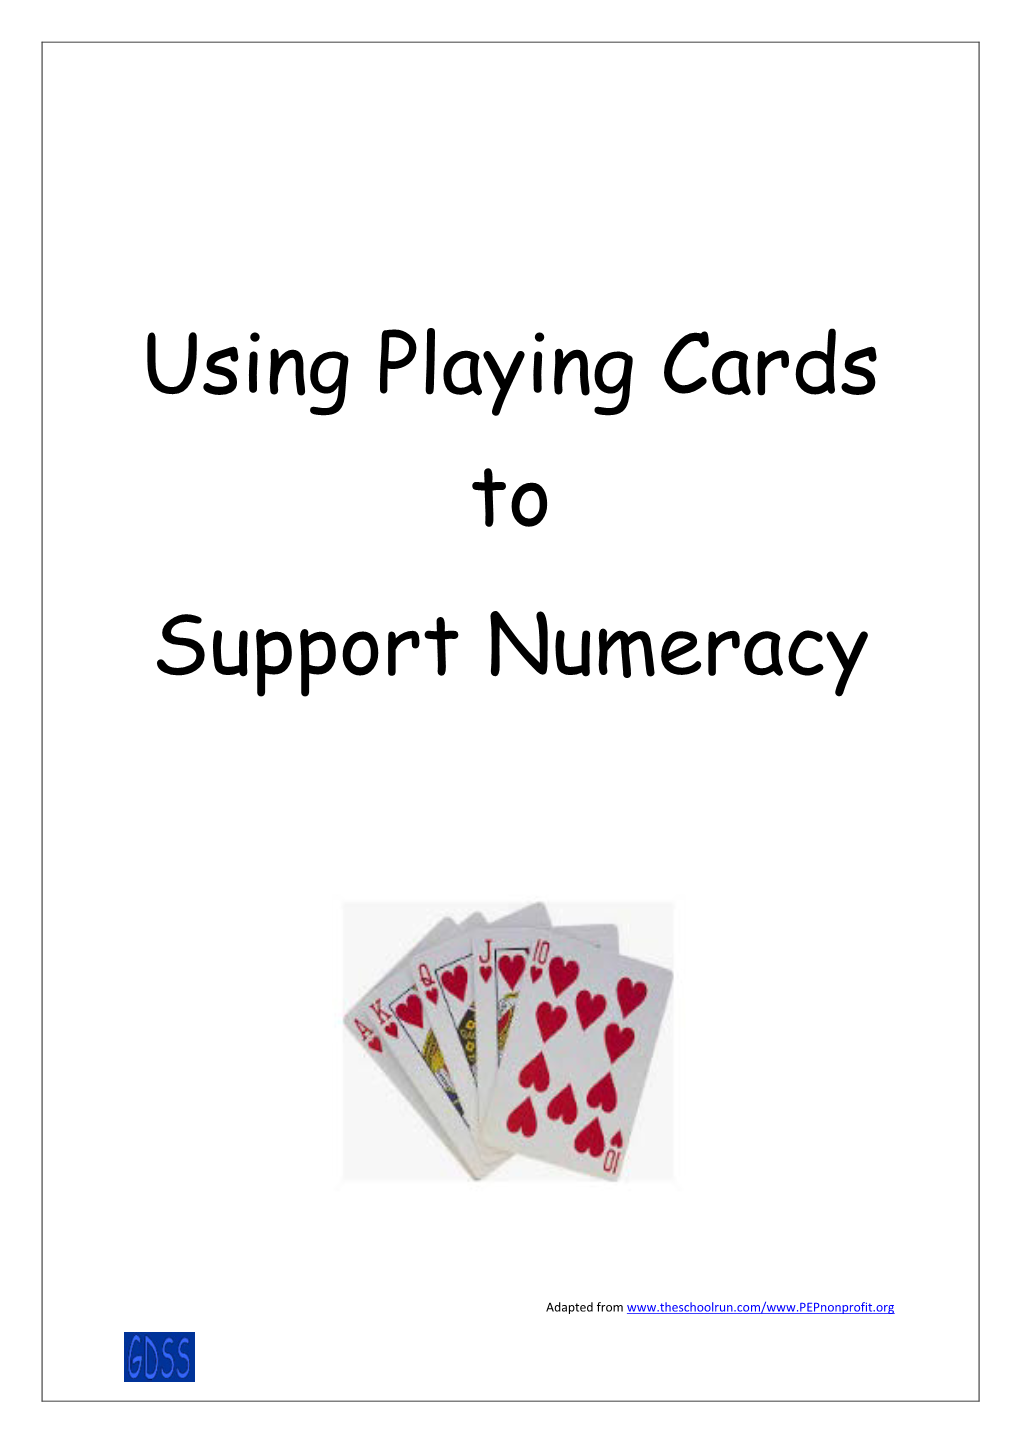 Using Playing Cards to Support Numeracy